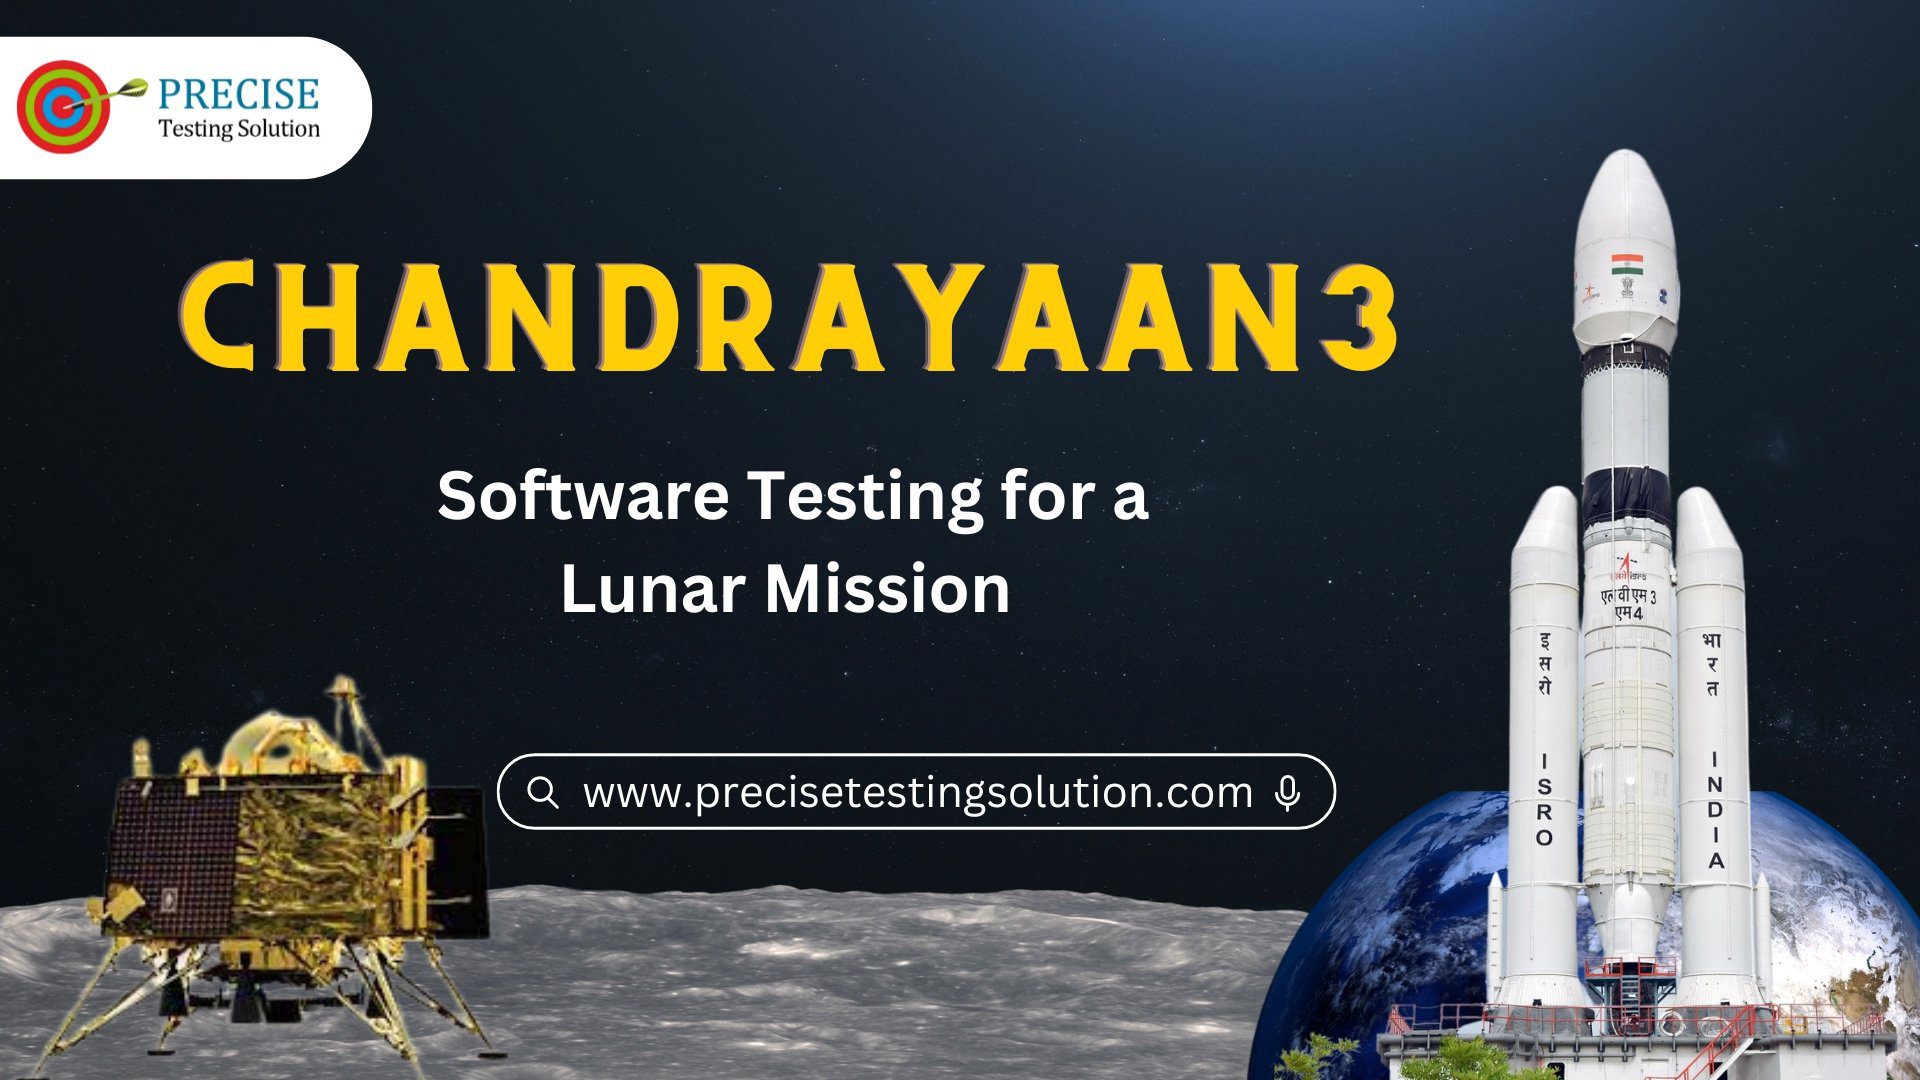 Chandrayaan3 - Software Testing for a Lunar Mission 